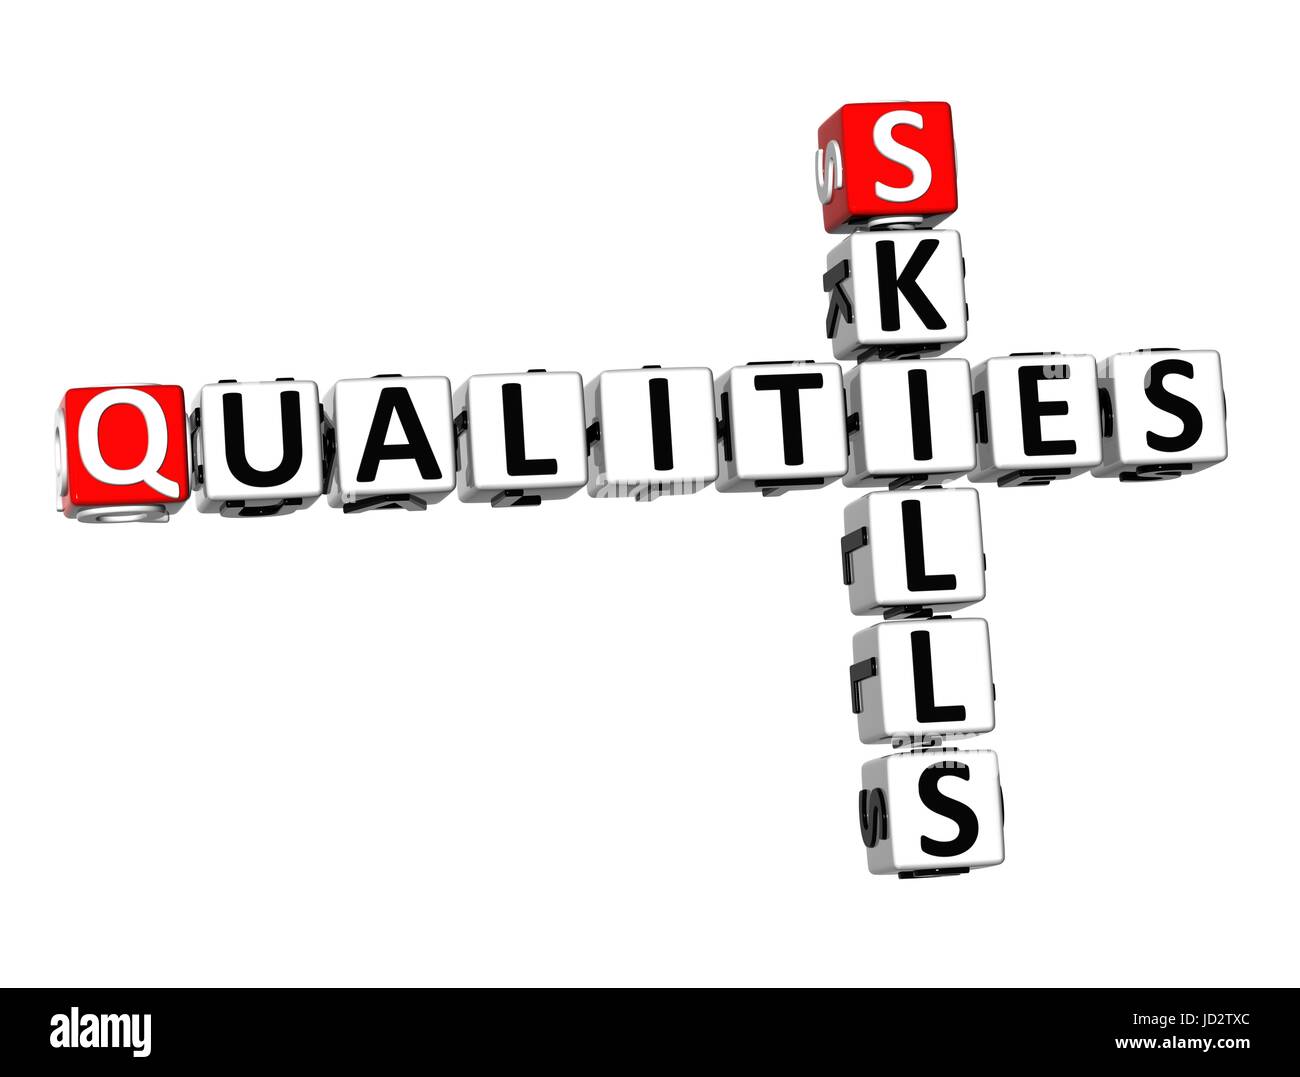 Skills qualities. 3d кроссворд. Crossword 3d. Crossword skills and qualities. Topic skills and qualities for success.